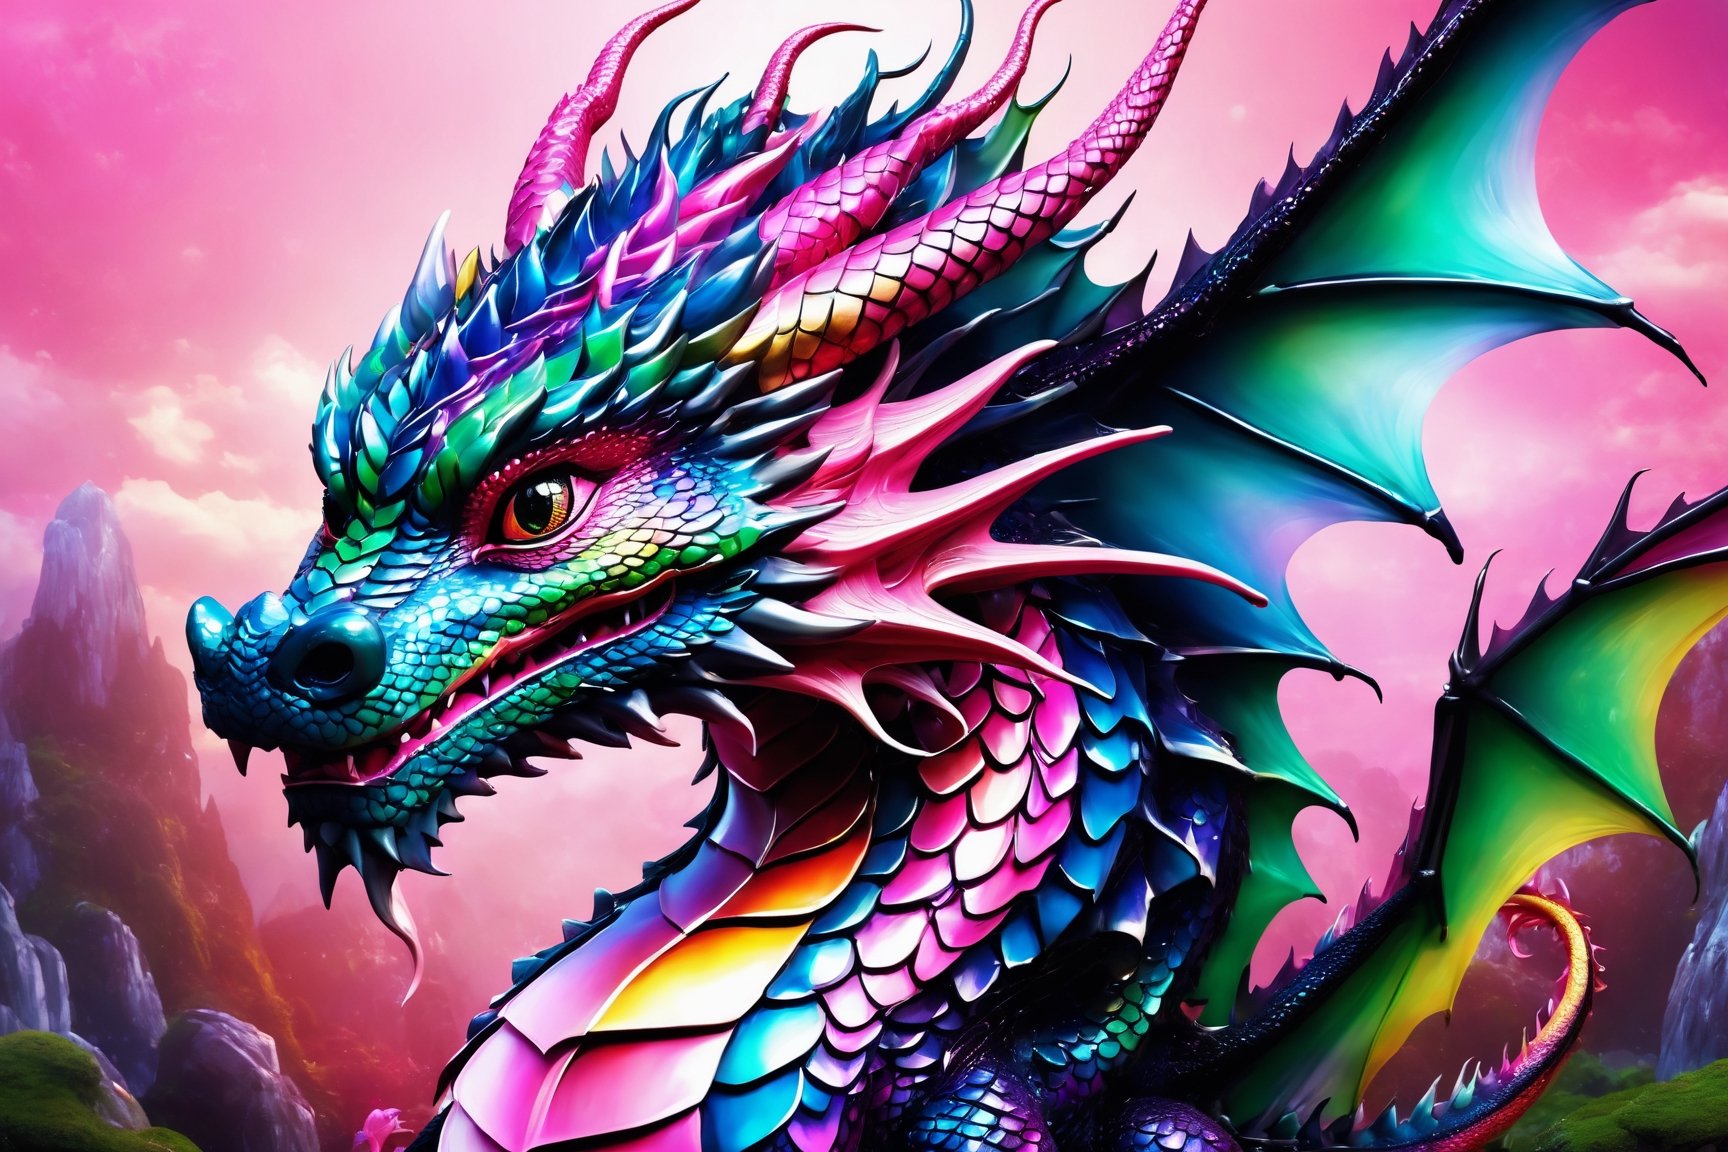 (best quality,8K,highres,masterpiece), ultra-detailed, (super colorful, pink dragon face), featuring the delightful and vibrant visage of a baby dragon. This enchanting dragon, with a cheerful smile, captivates the viewer as it gazes directly into their eyes. The background is a simple yet vivid white, accentuating the dragon's presence. Its expressive eyes, composed of deep black, are surrounded by a dazzling array of shades of pink that adorn its face, creating a mesmerizing and harmonious display of color. The dragon's distinctive features, including its unique head wings, fuse seamlessly into this radiant and fantastical portrayal of a pink dragon's face.